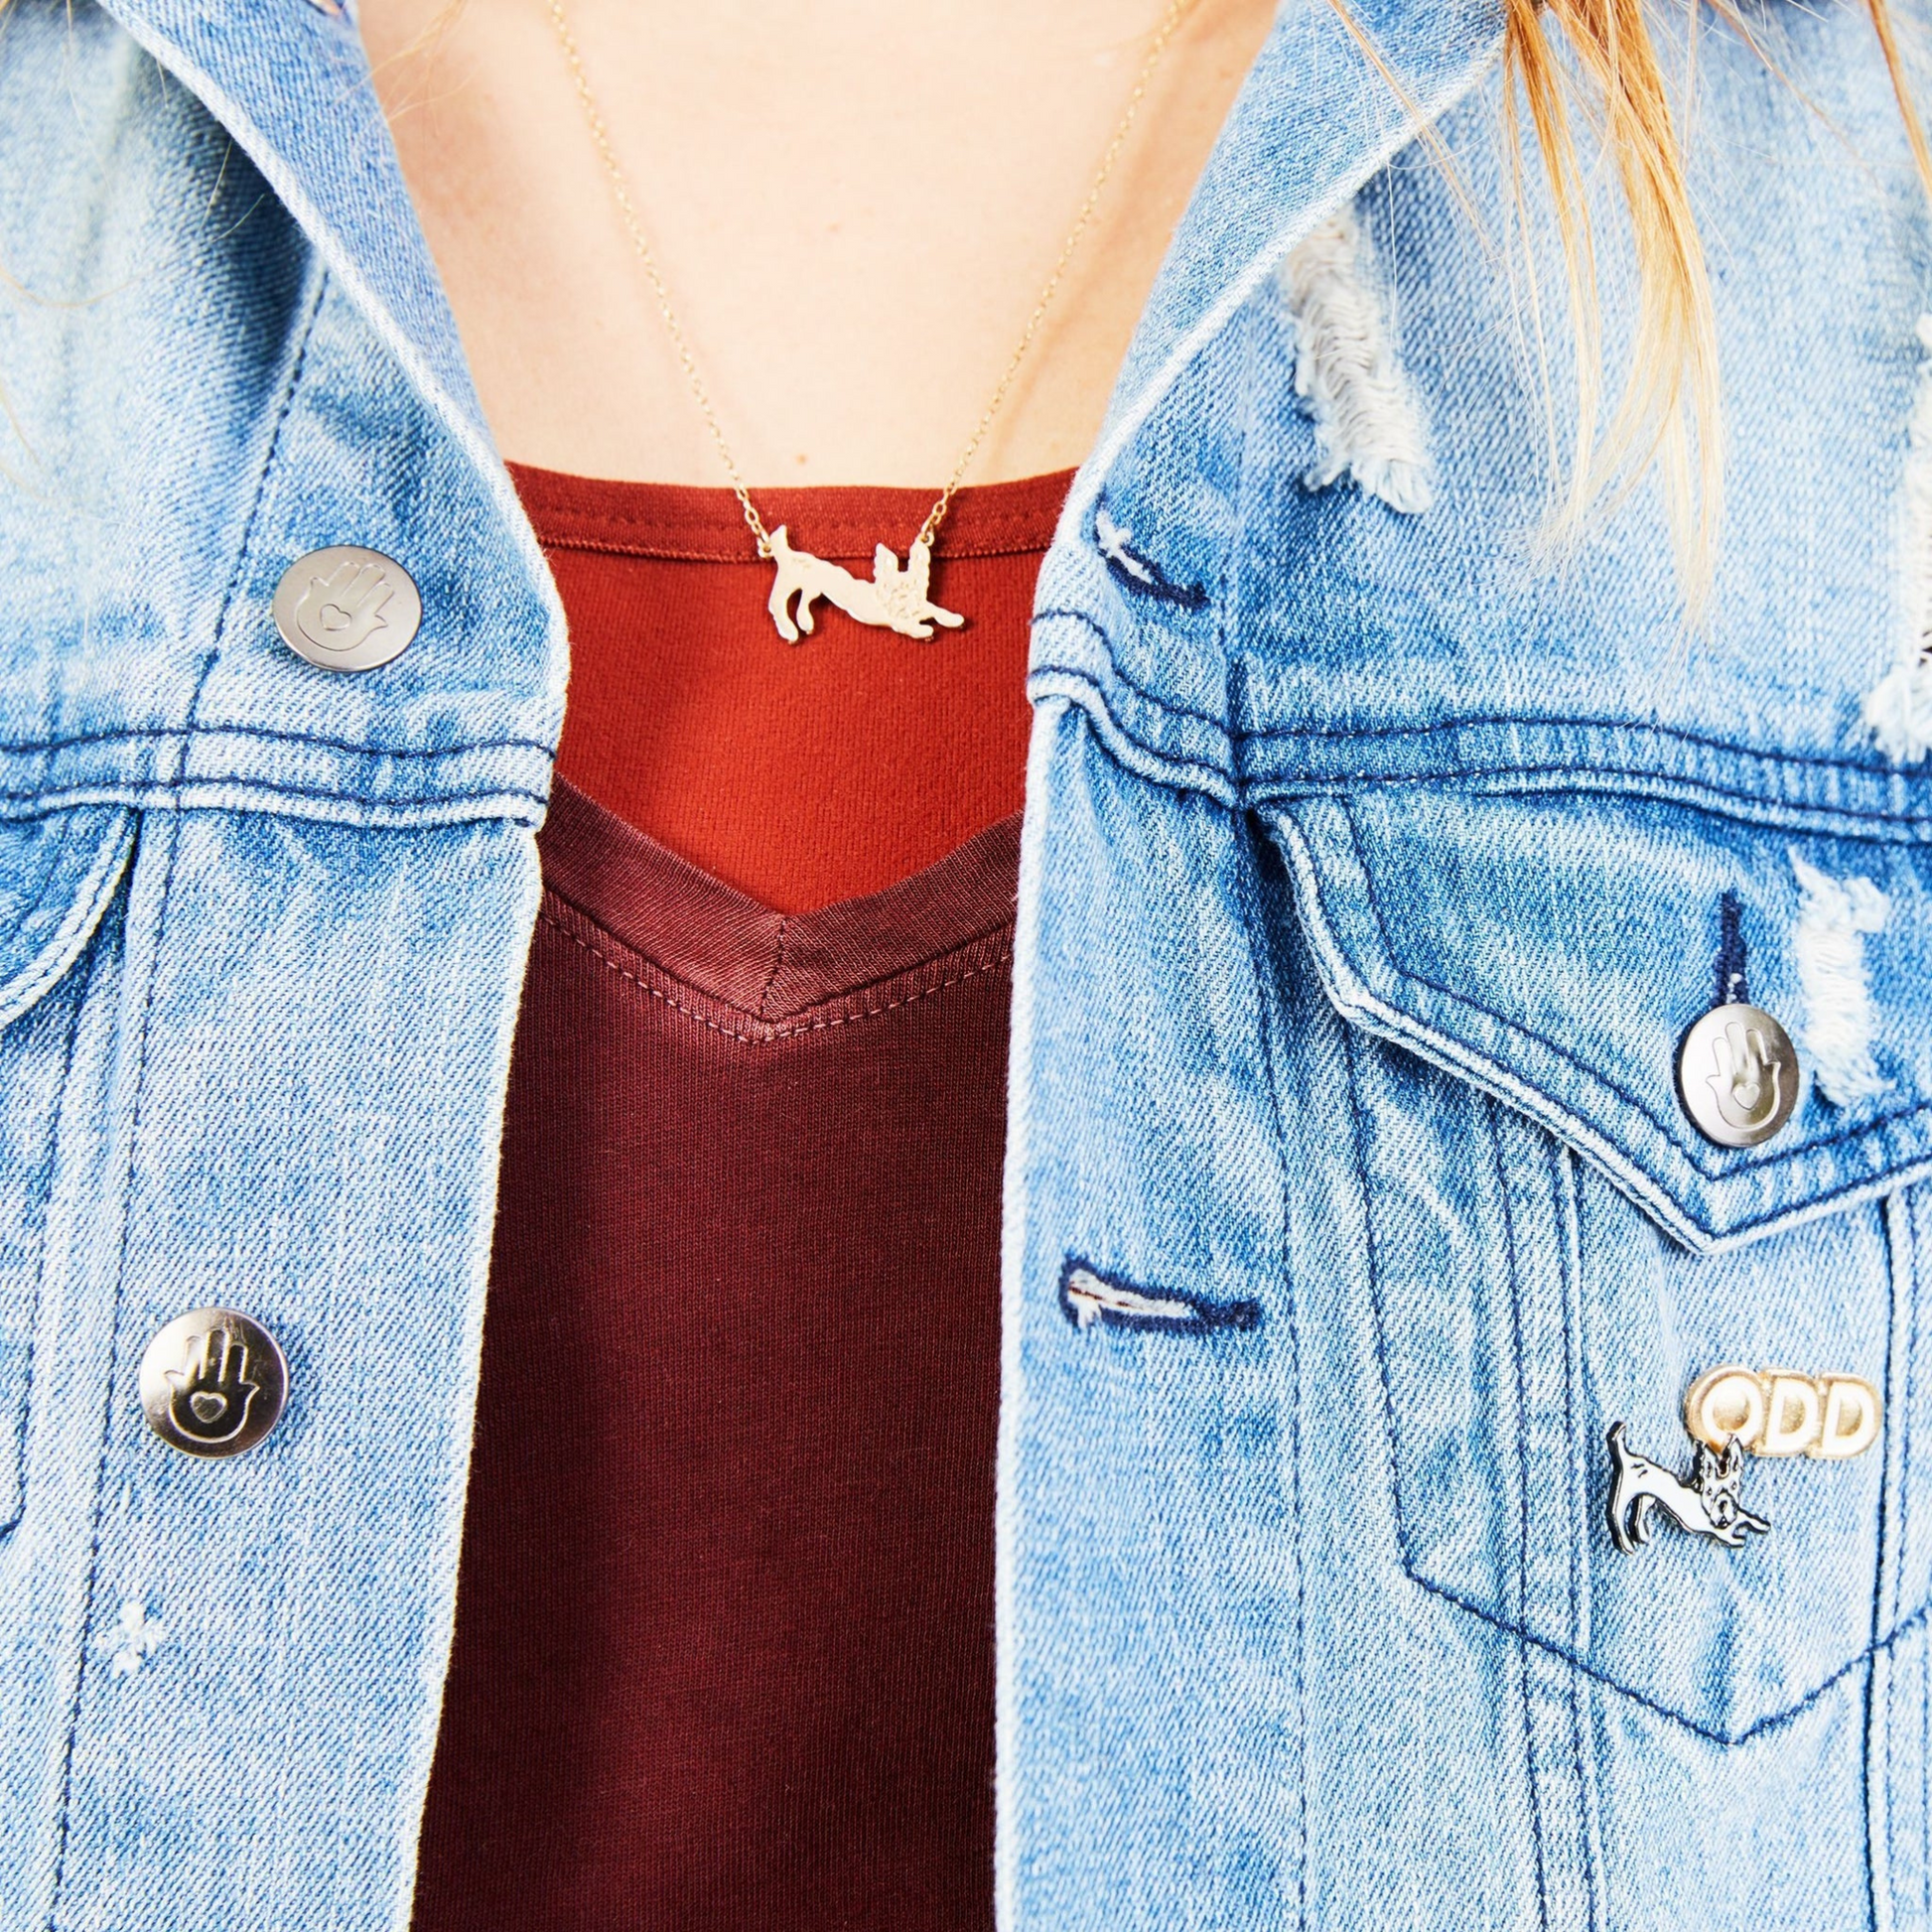 person wearing jean jacket and red top with gold dog necklace